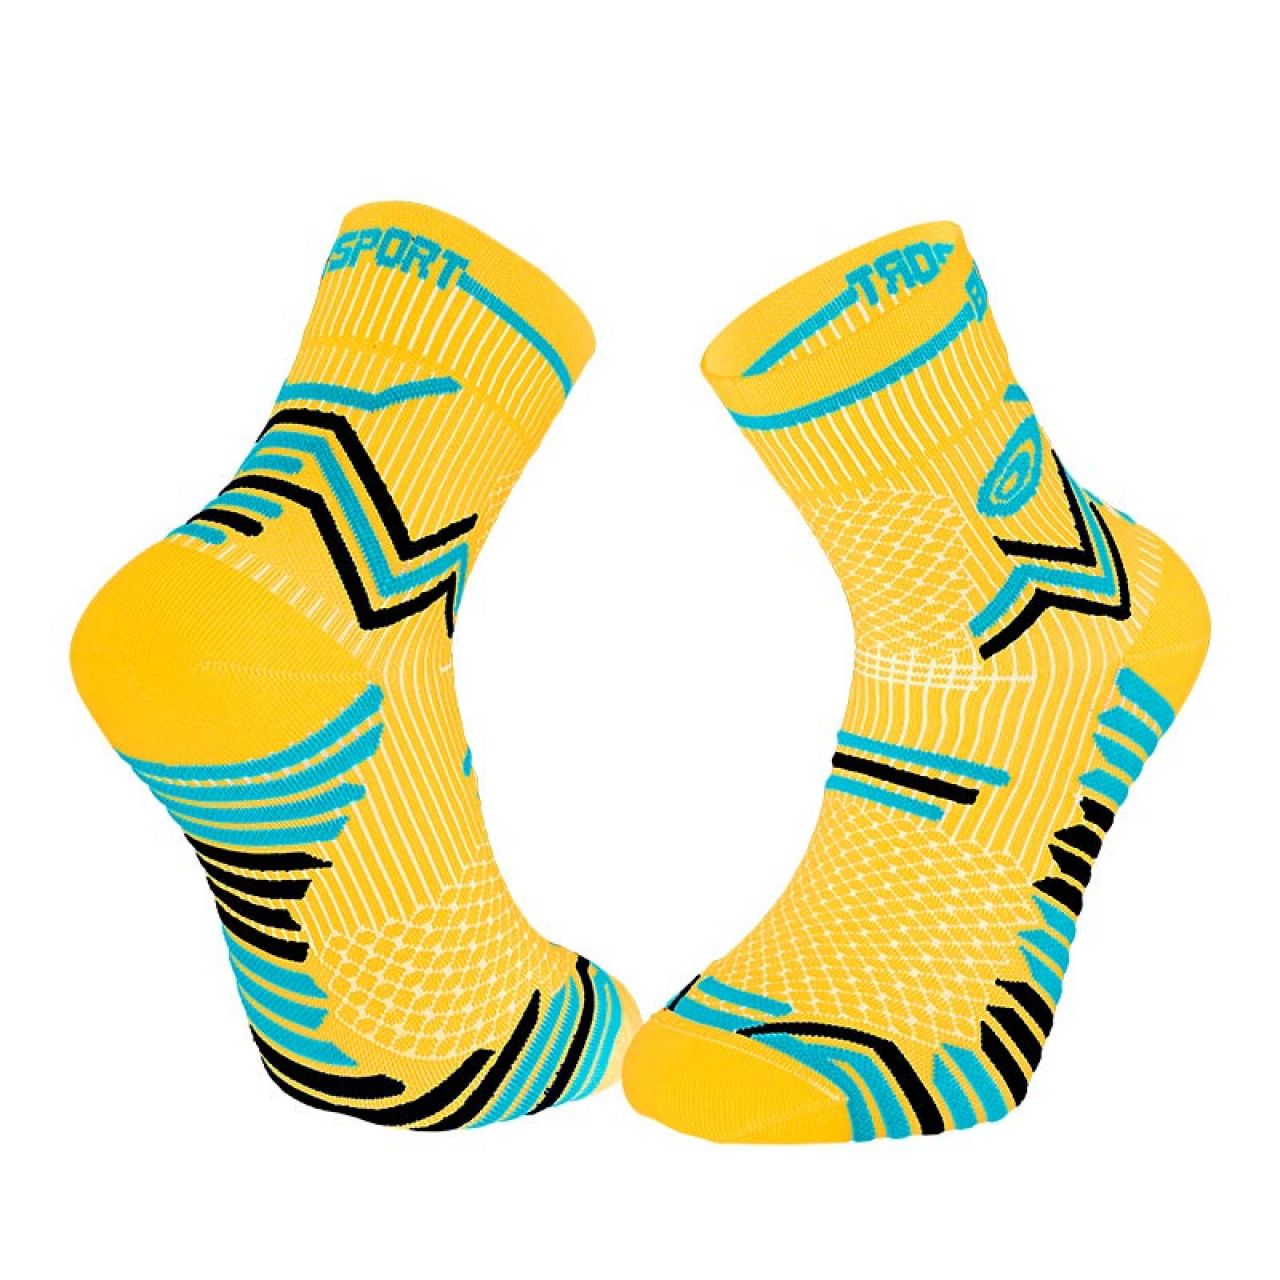 BV SPORT CHAUSSETTES ULTRA TRAIL JAUNE ET BLEUE Made in France